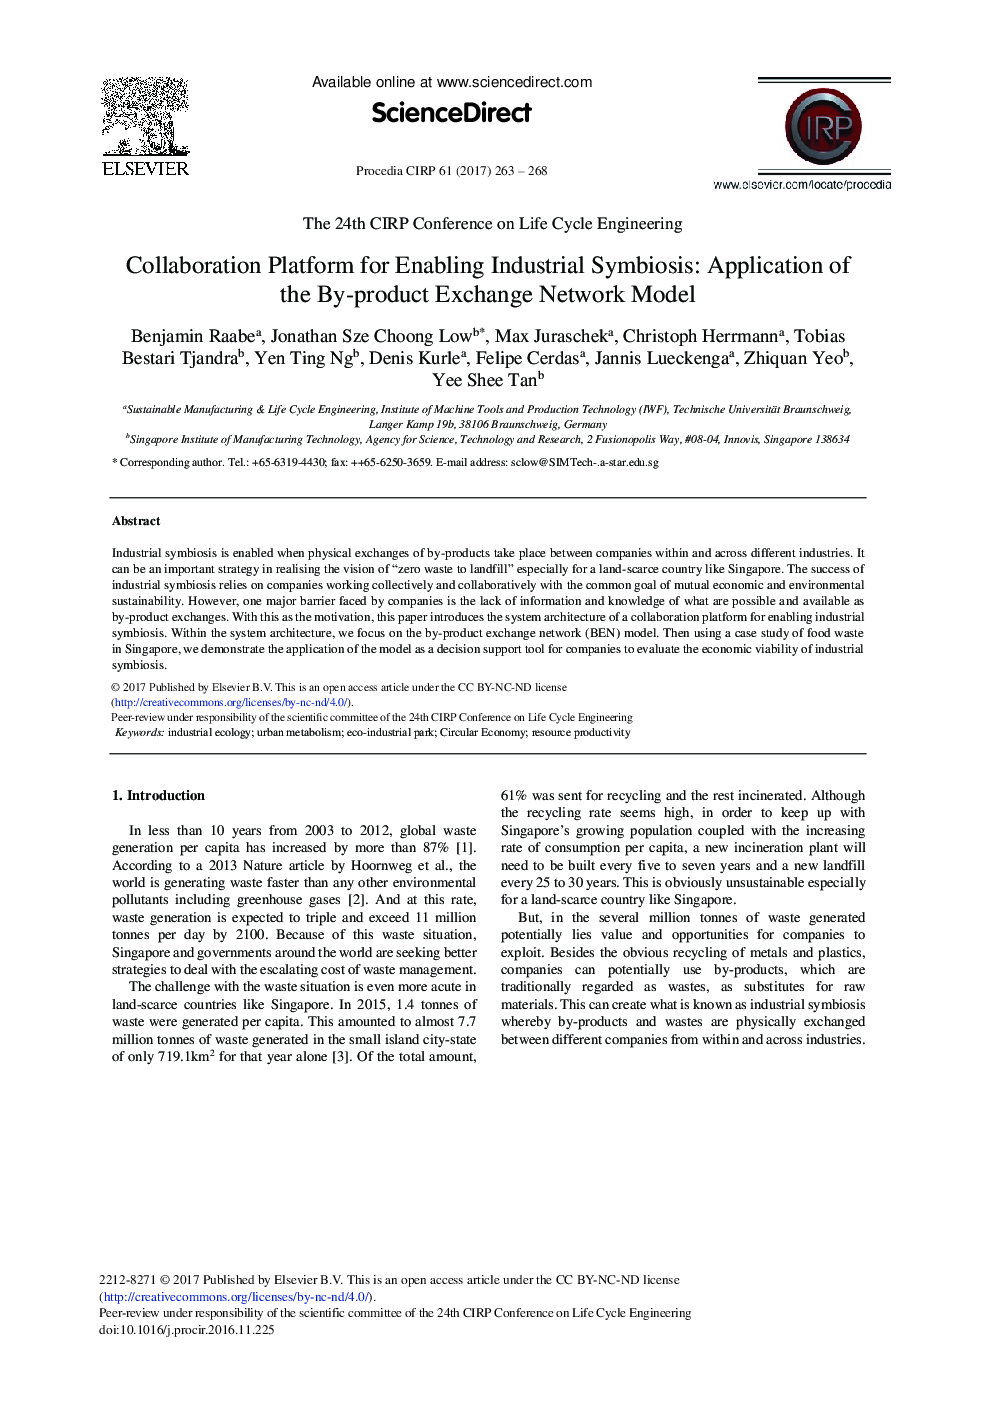 Collaboration Platform for Enabling Industrial Symbiosis: Application of the By-product Exchange Network Model